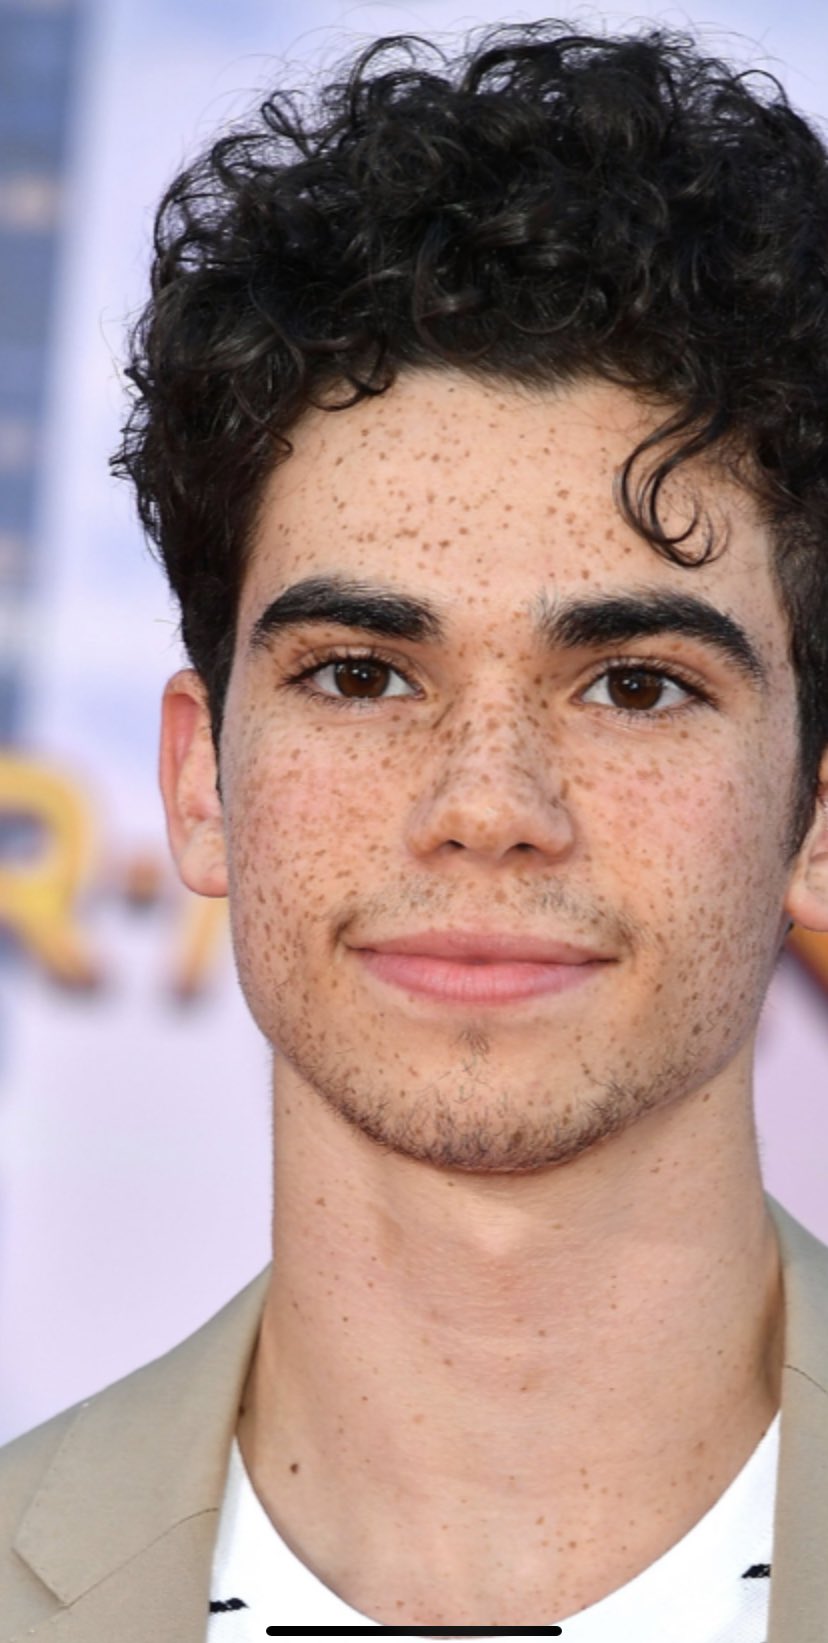 Happy Birthday Cameron Boyce !!!! You are truly missed       